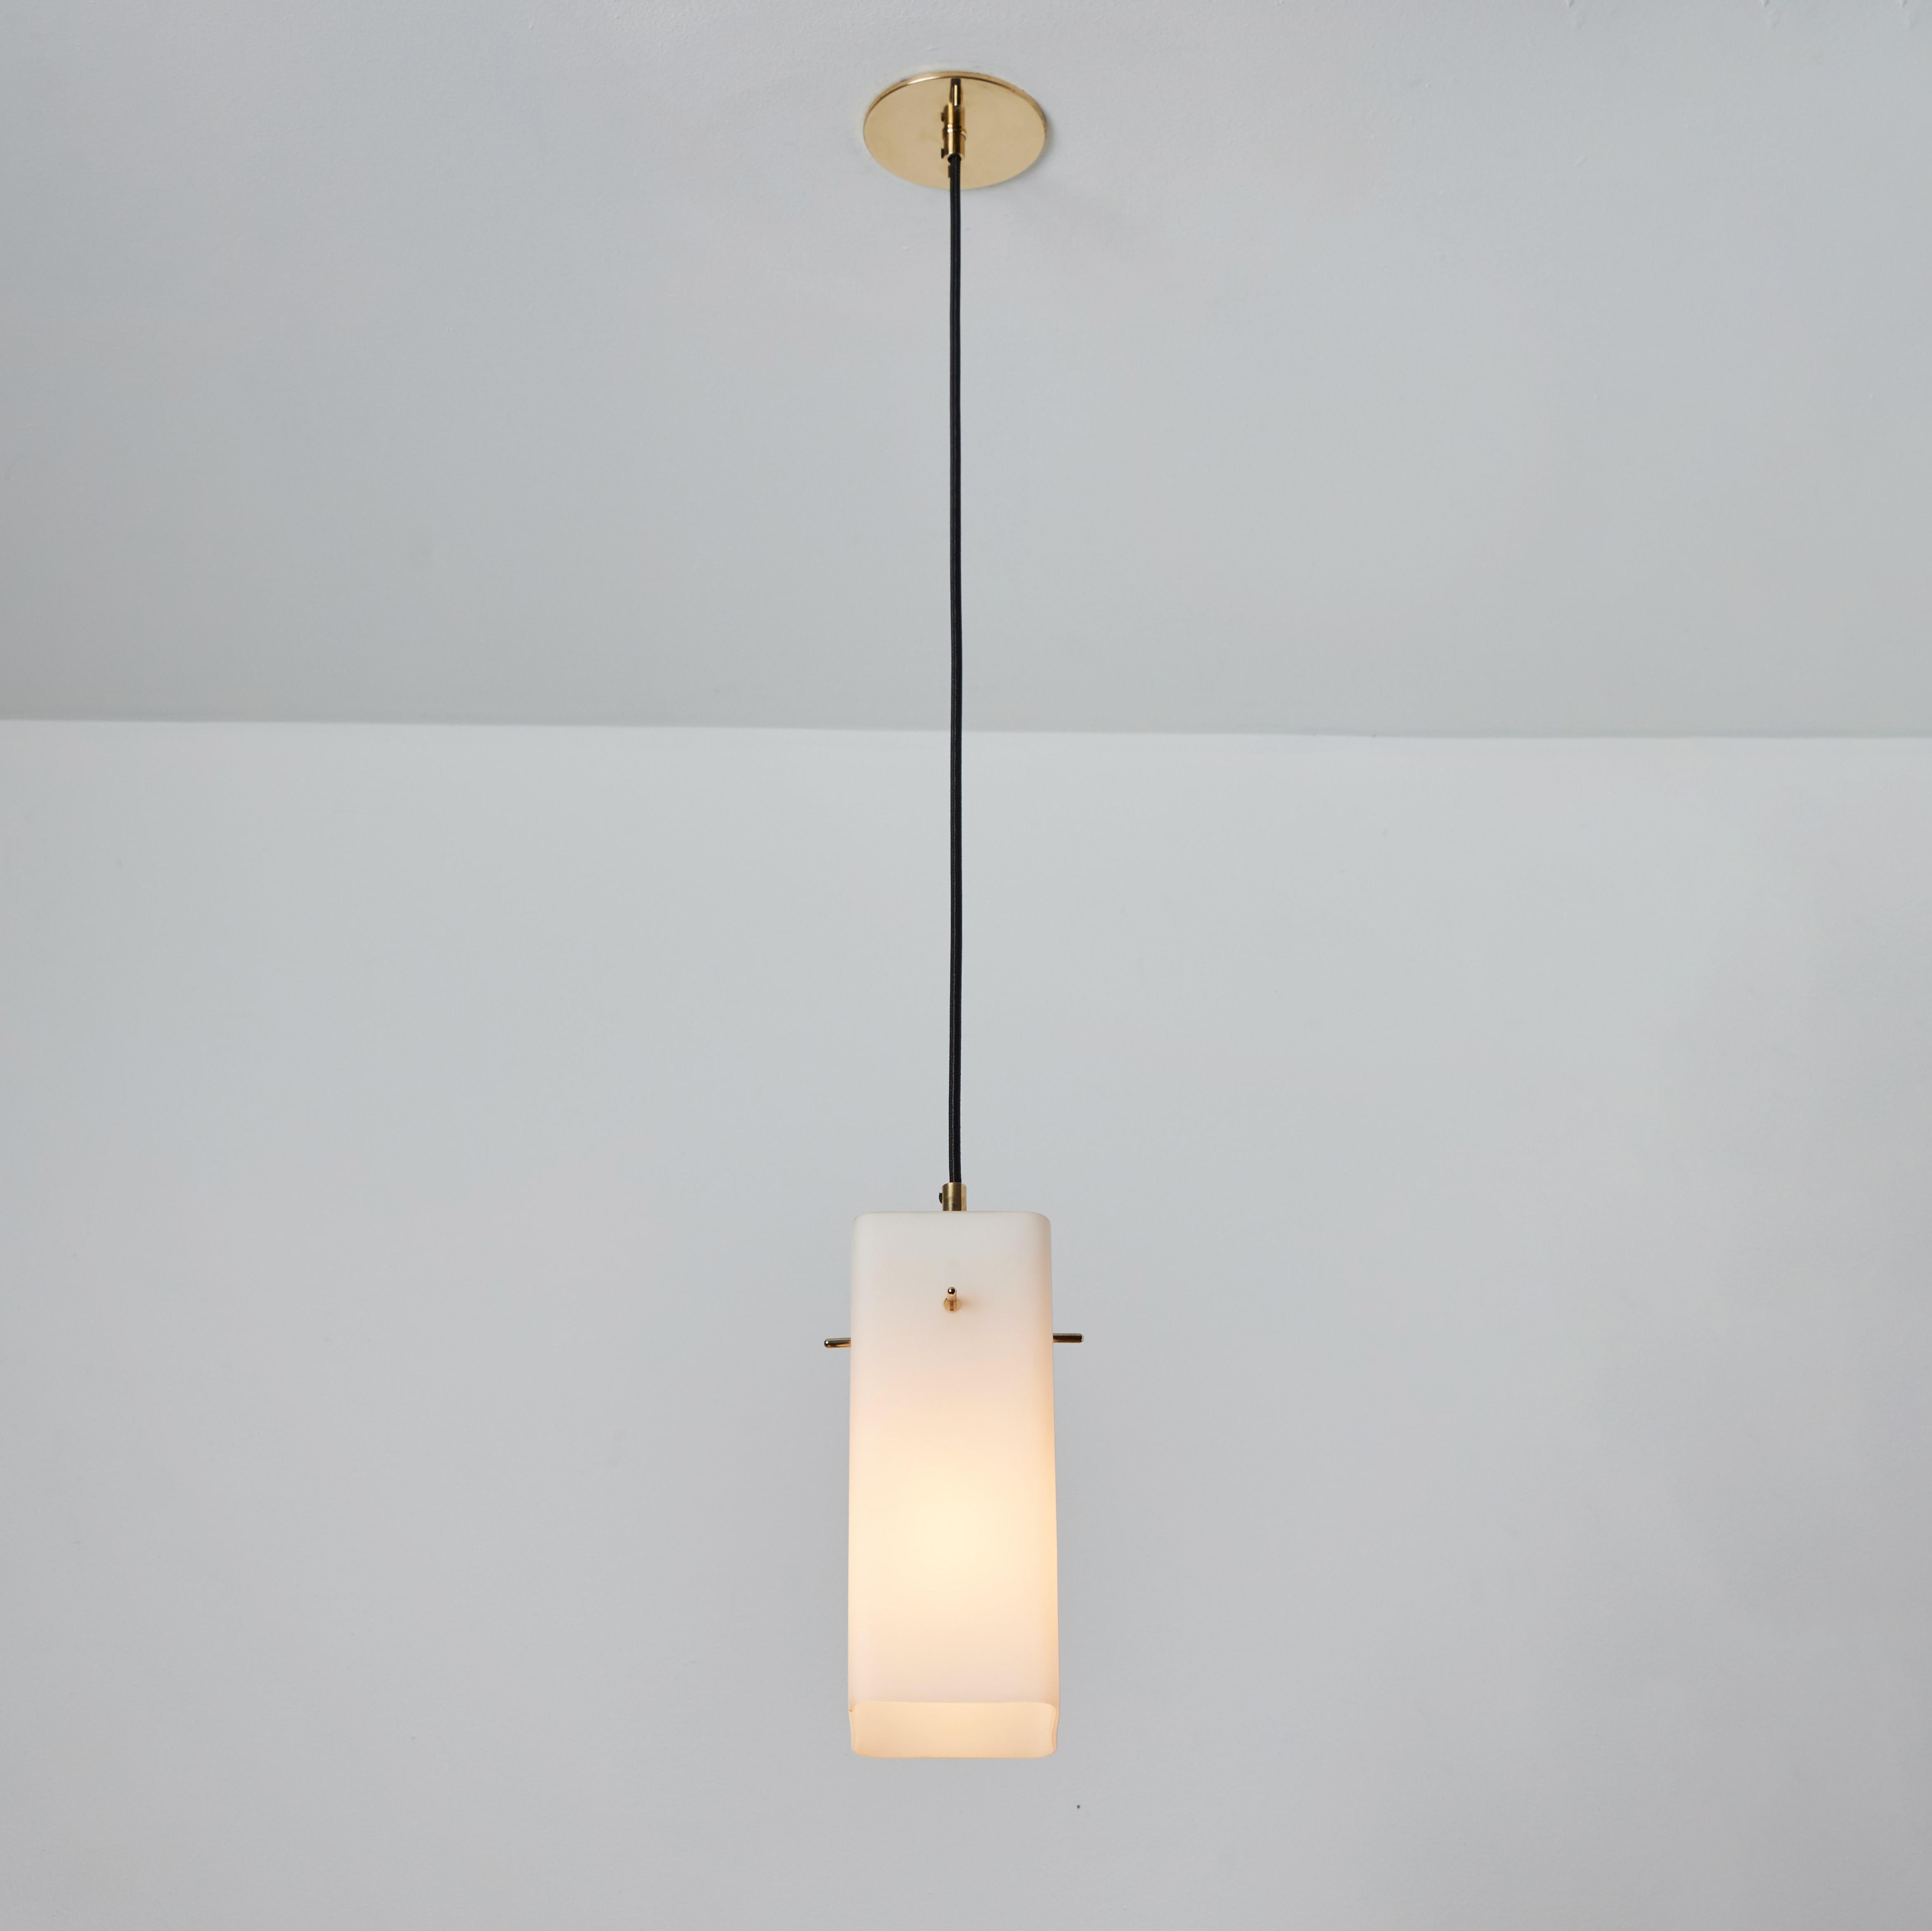 1960s Stilnovo Opaline Glass & Brass Pendant. Executed in sculptural geometric opaline glass with brass hardware. A highly refined ceiling lamp light of attractive scale and incomparable refinement. Unmarked.

Stilnovo was one of the most innovative